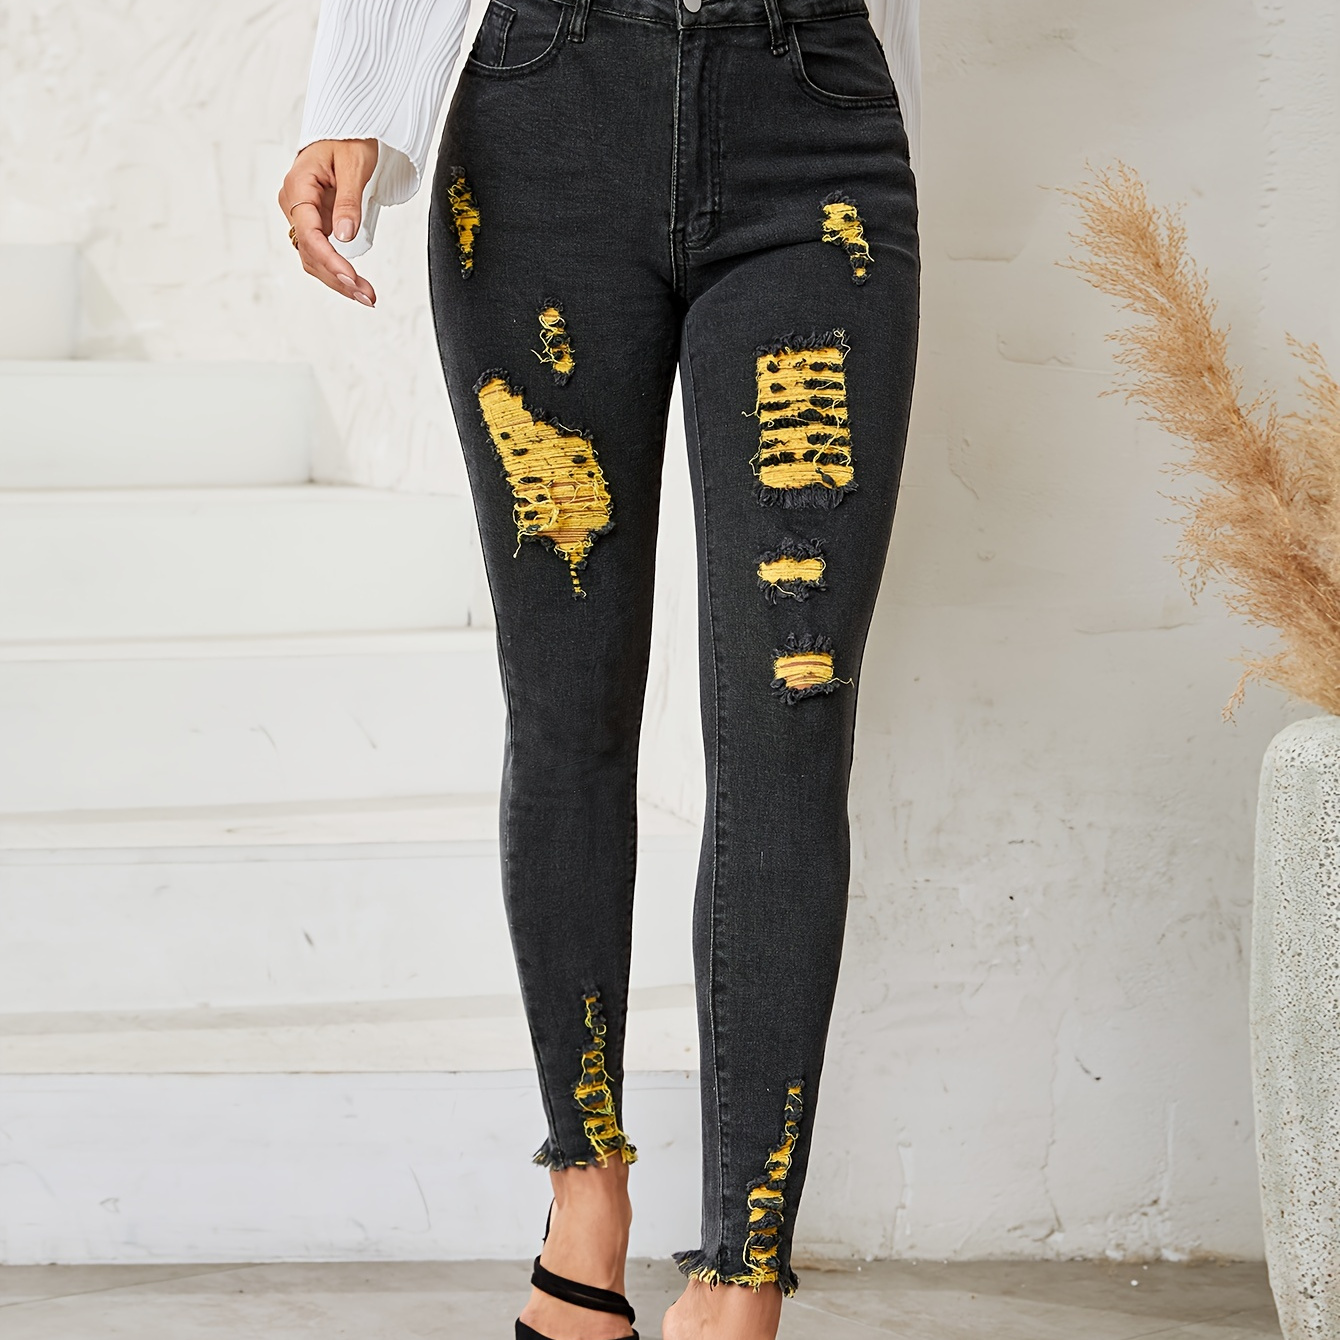 Black Ripped Holes Skinny Jeans, Distressed Slim Fit Mid-Stretch Tight  Jeans, Women's Denim Jeans & Clothing